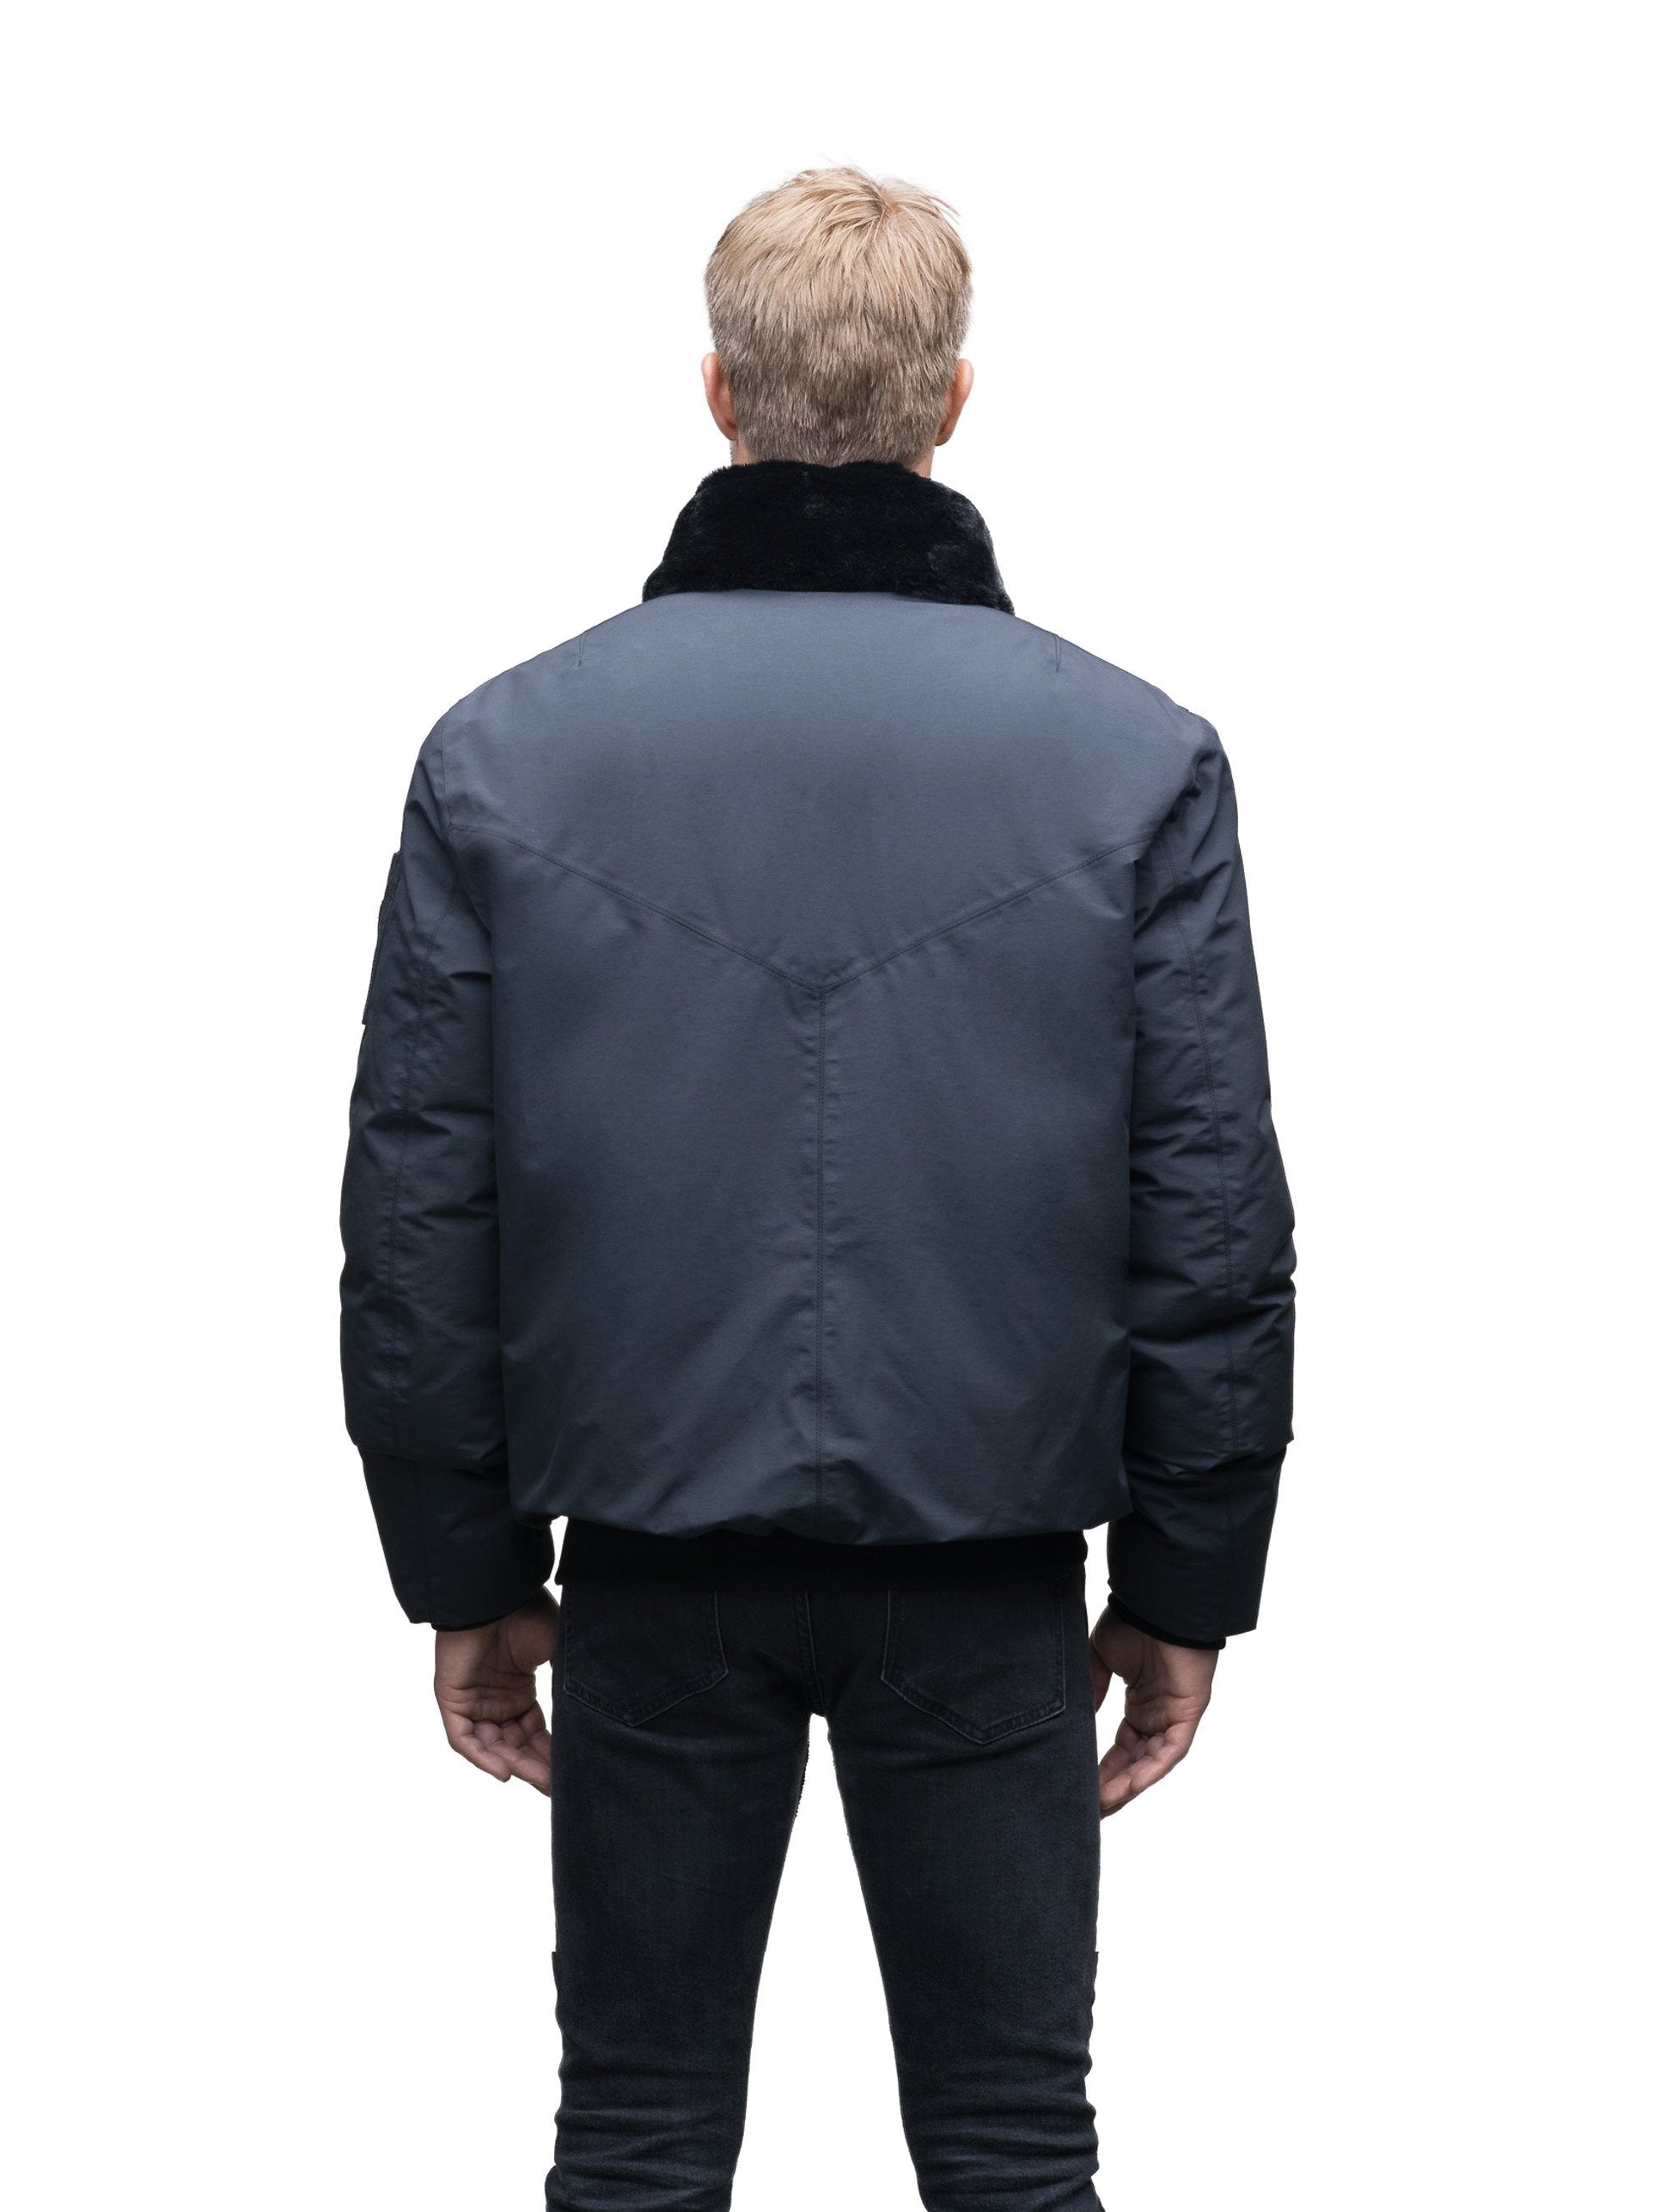 Men's classic down filled bomber jacket with a minimal design in Cy Black